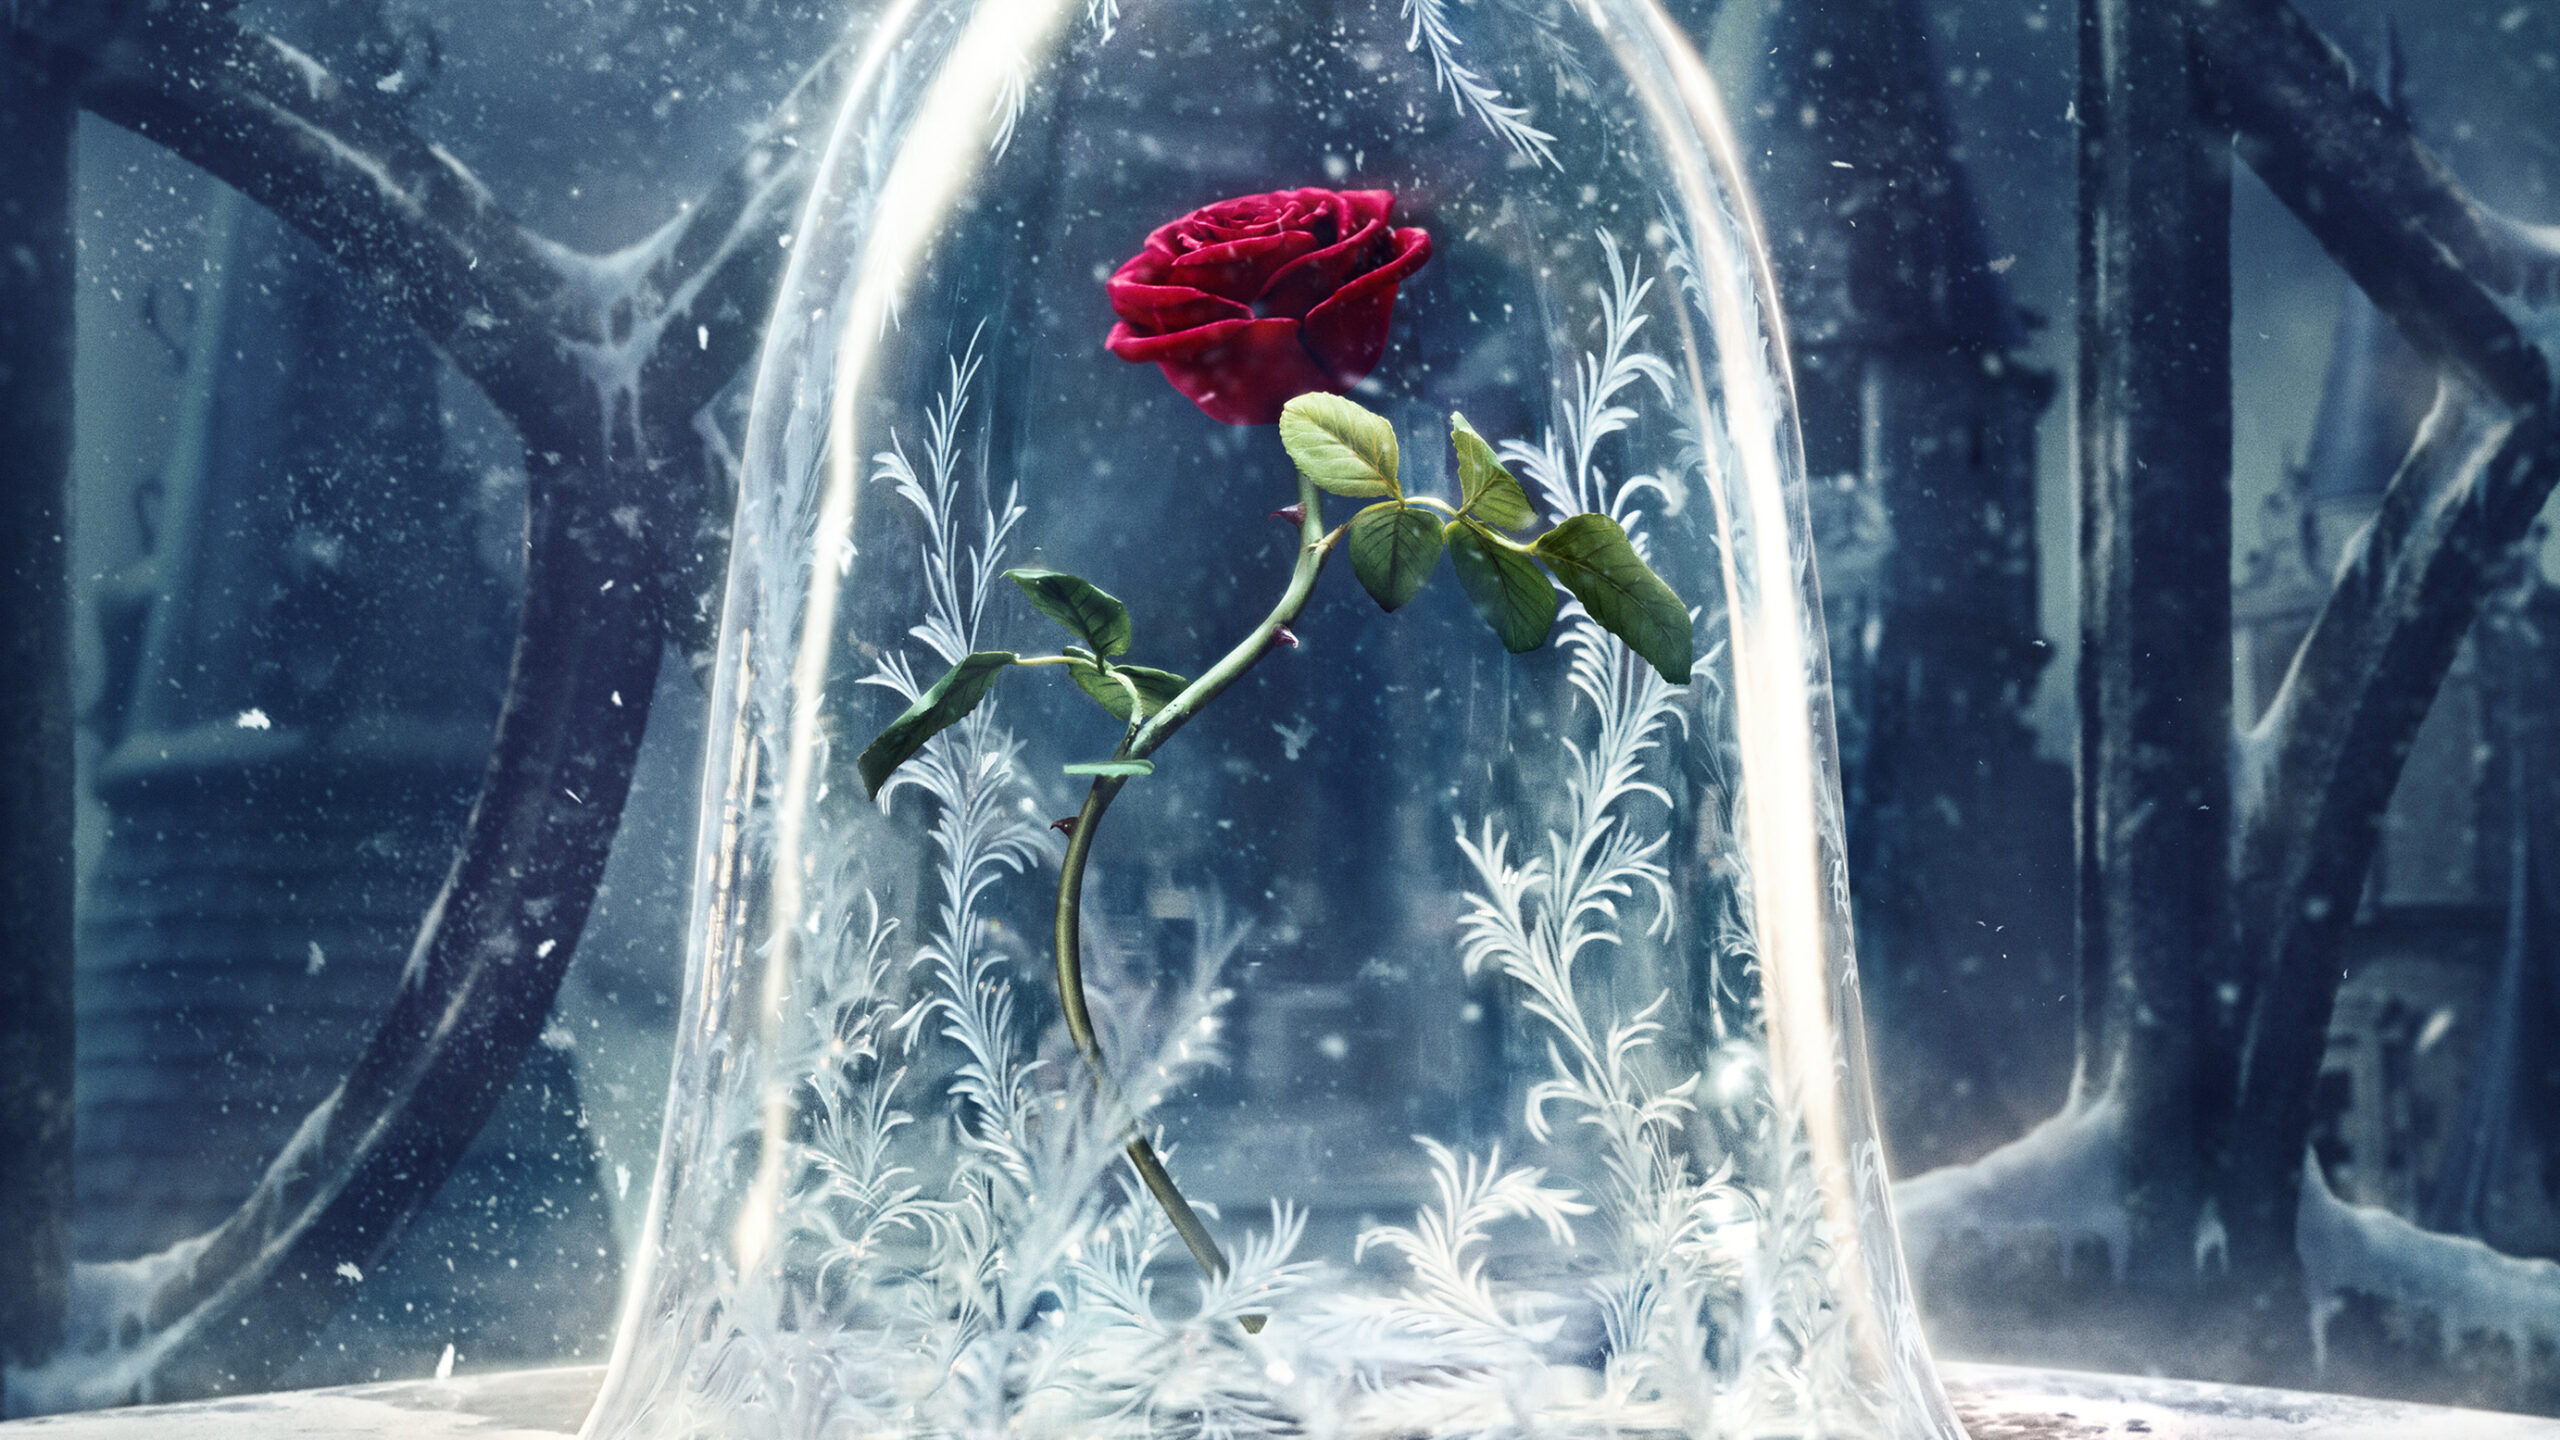 beauty and the beast 2764x1555 2017 movies disney rose 1261 scaled